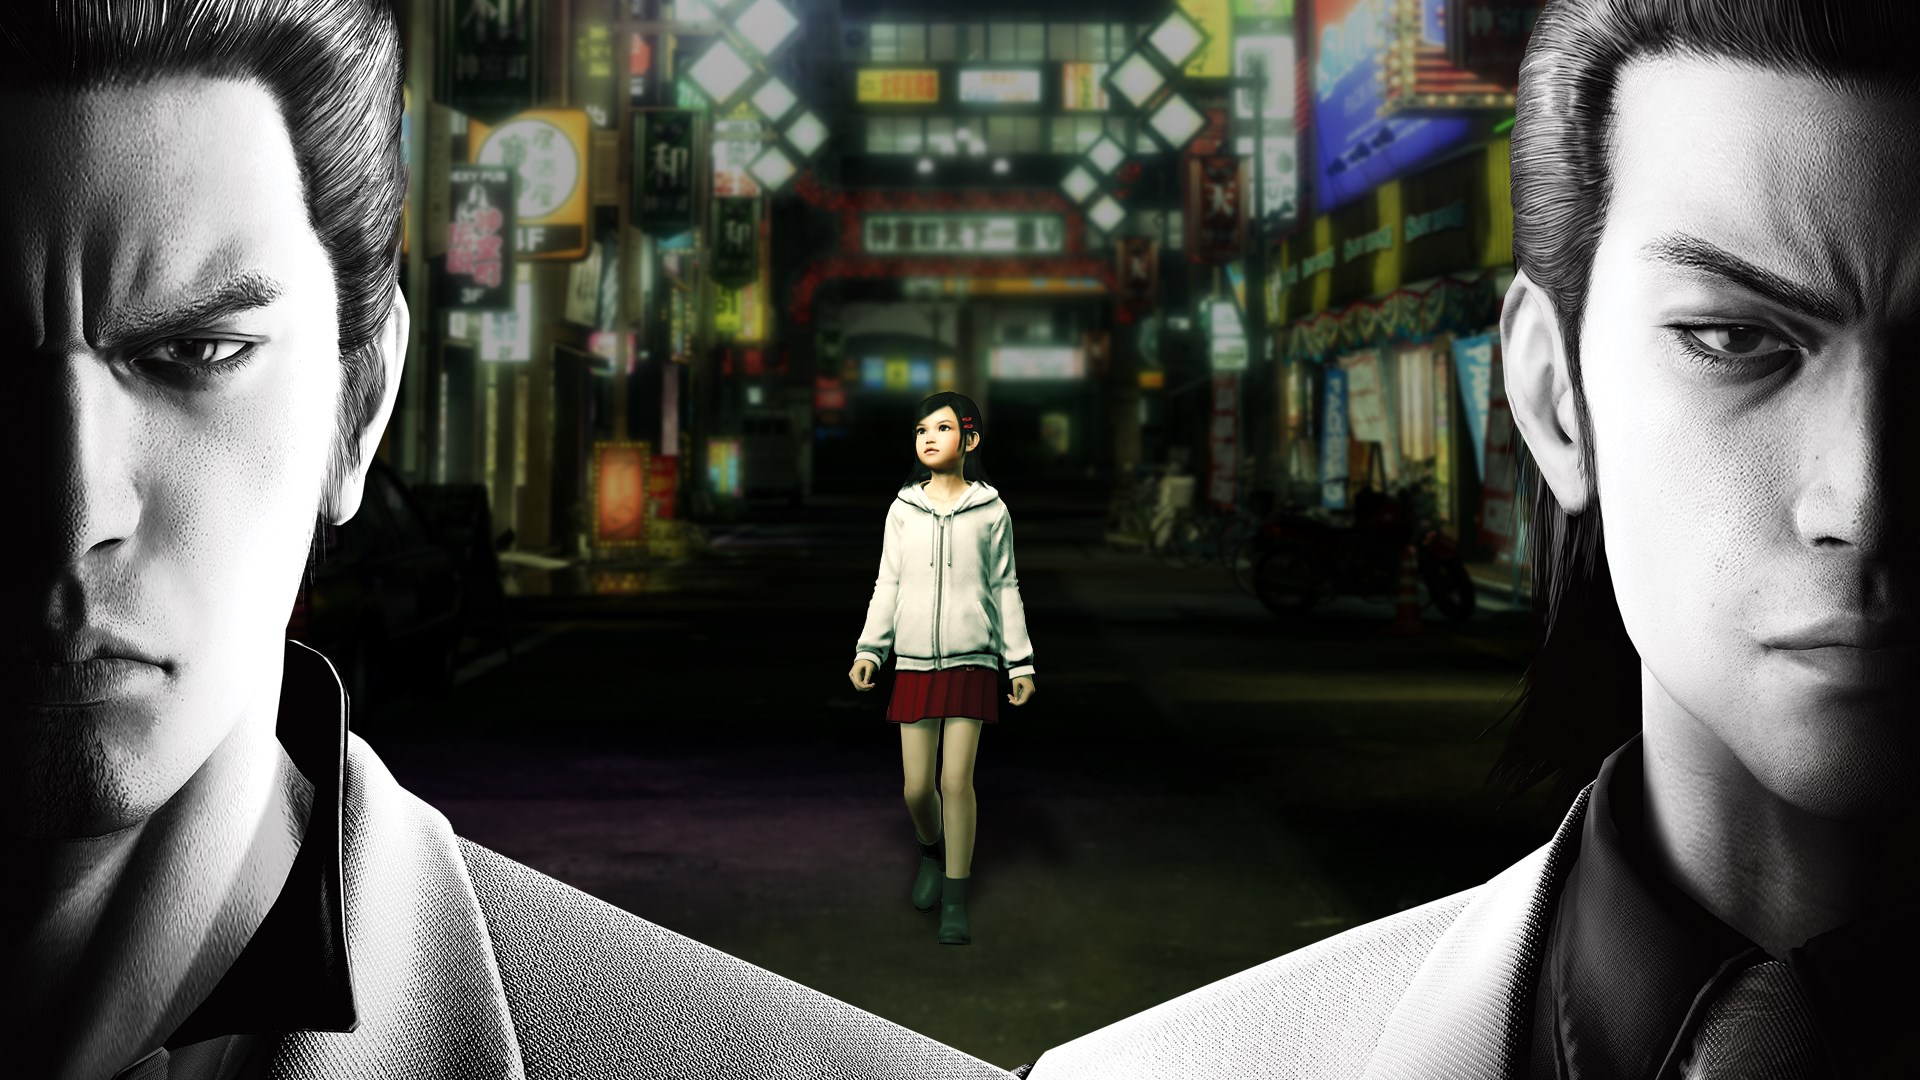 New Titles Coming To Xbox Game Pass This July; Yakuza Kiwami, Carrion And More